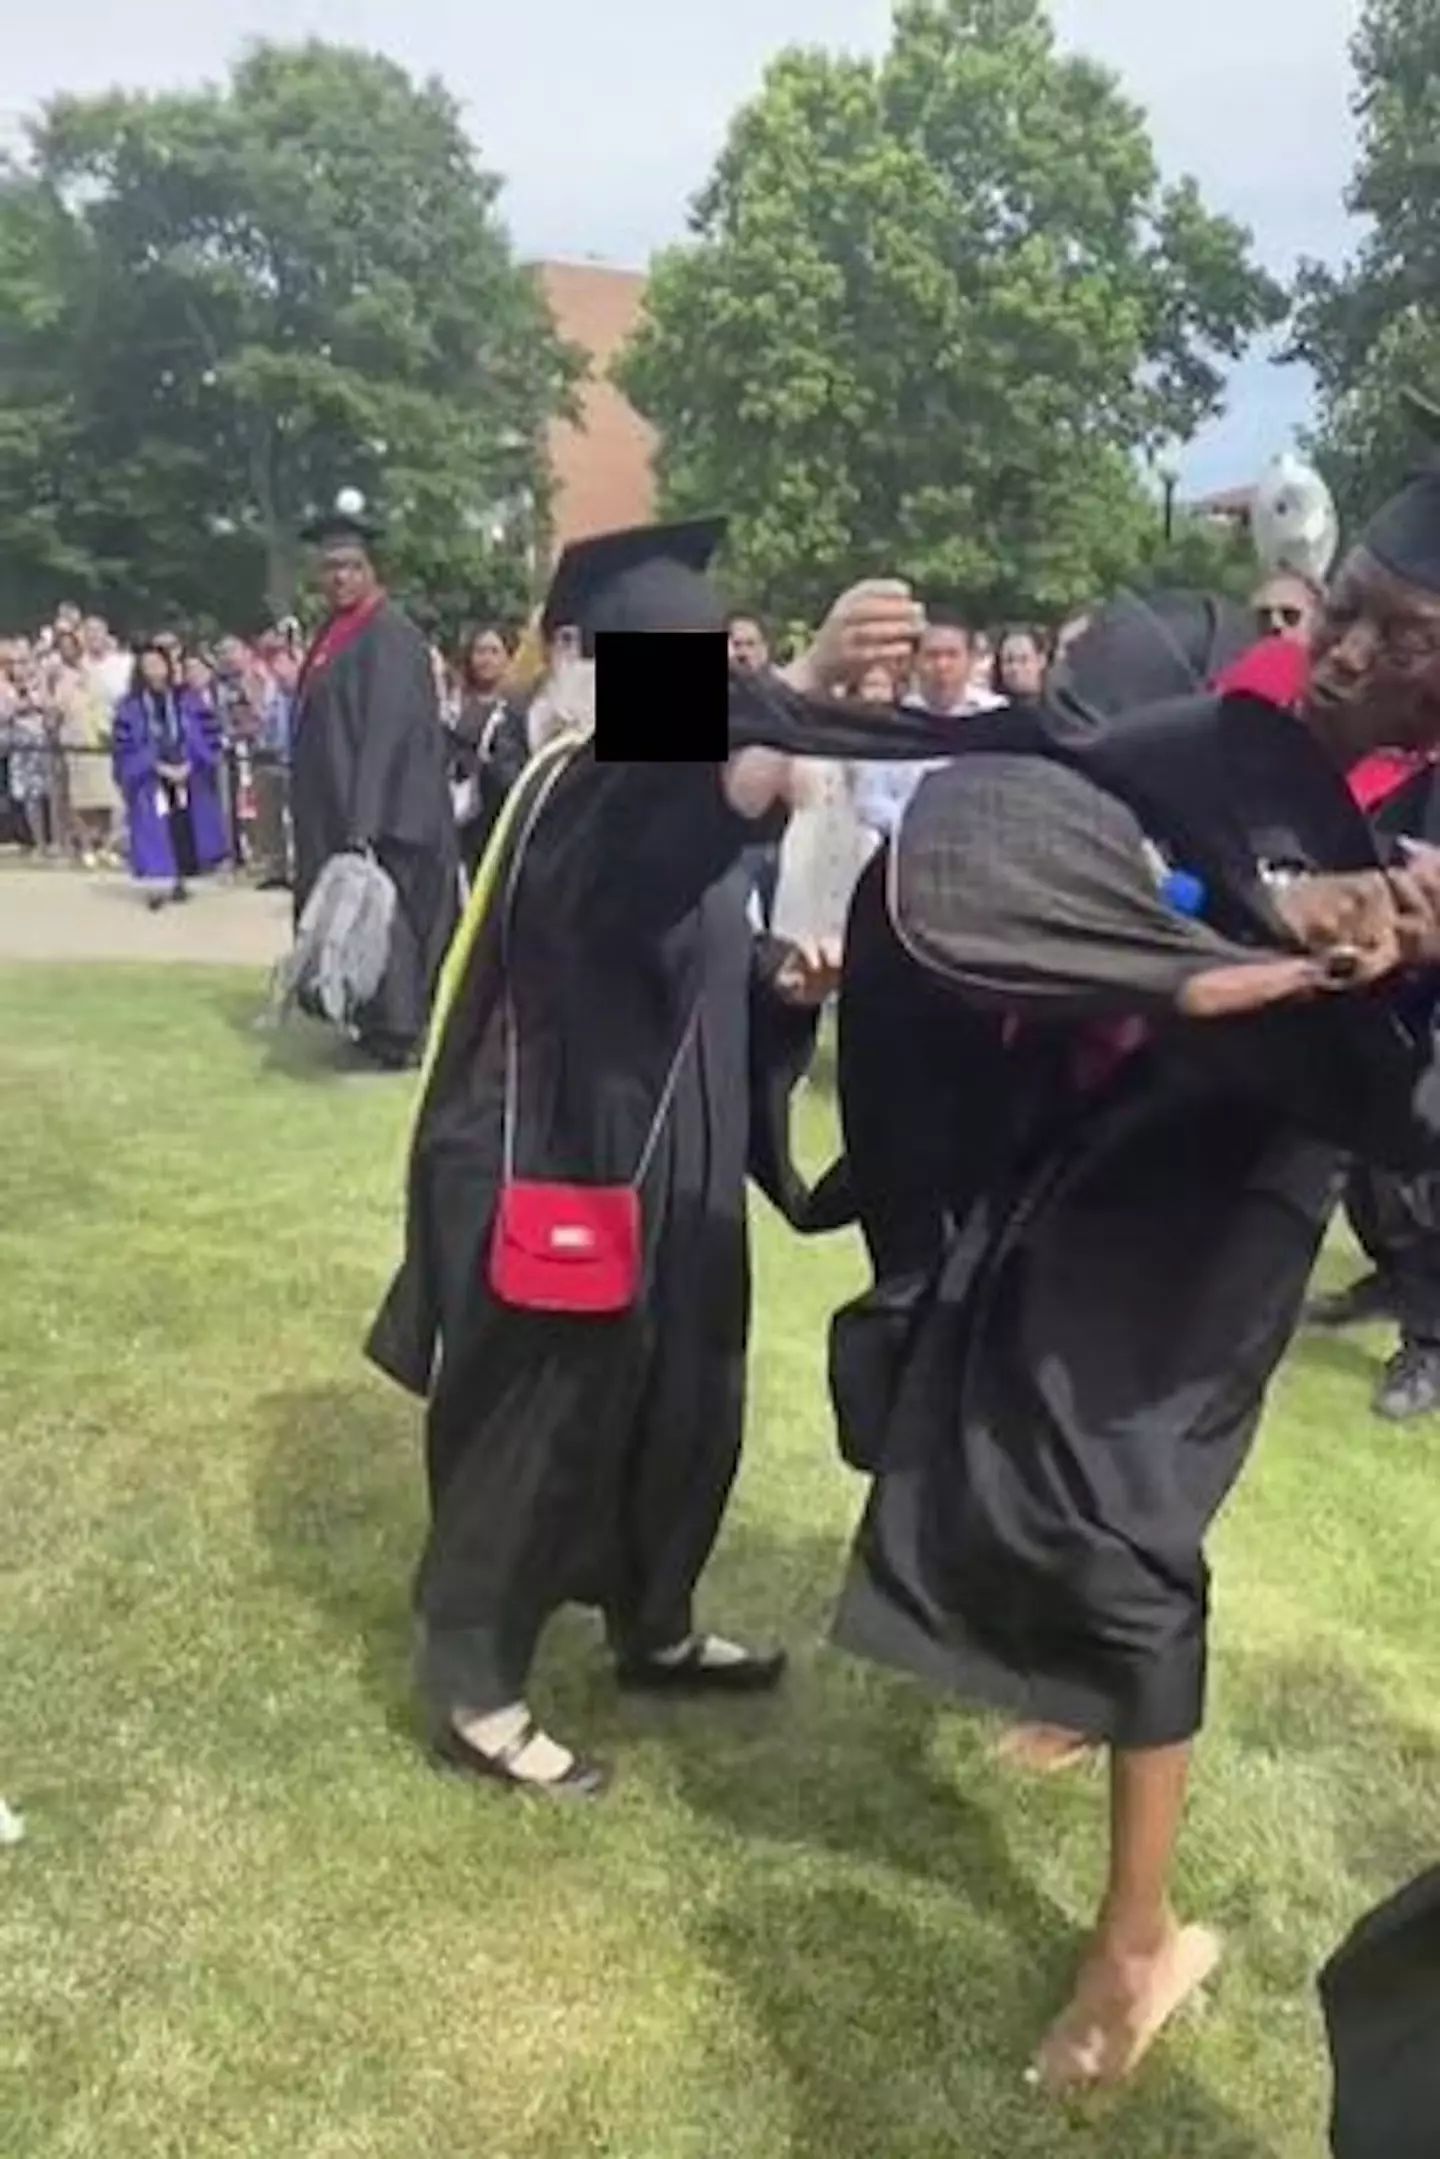 A woman who's name was being called out at a graduation ceremony angrily snatched the microphone from the administrator, later accusing her of reading names 'super fast for some black people'.